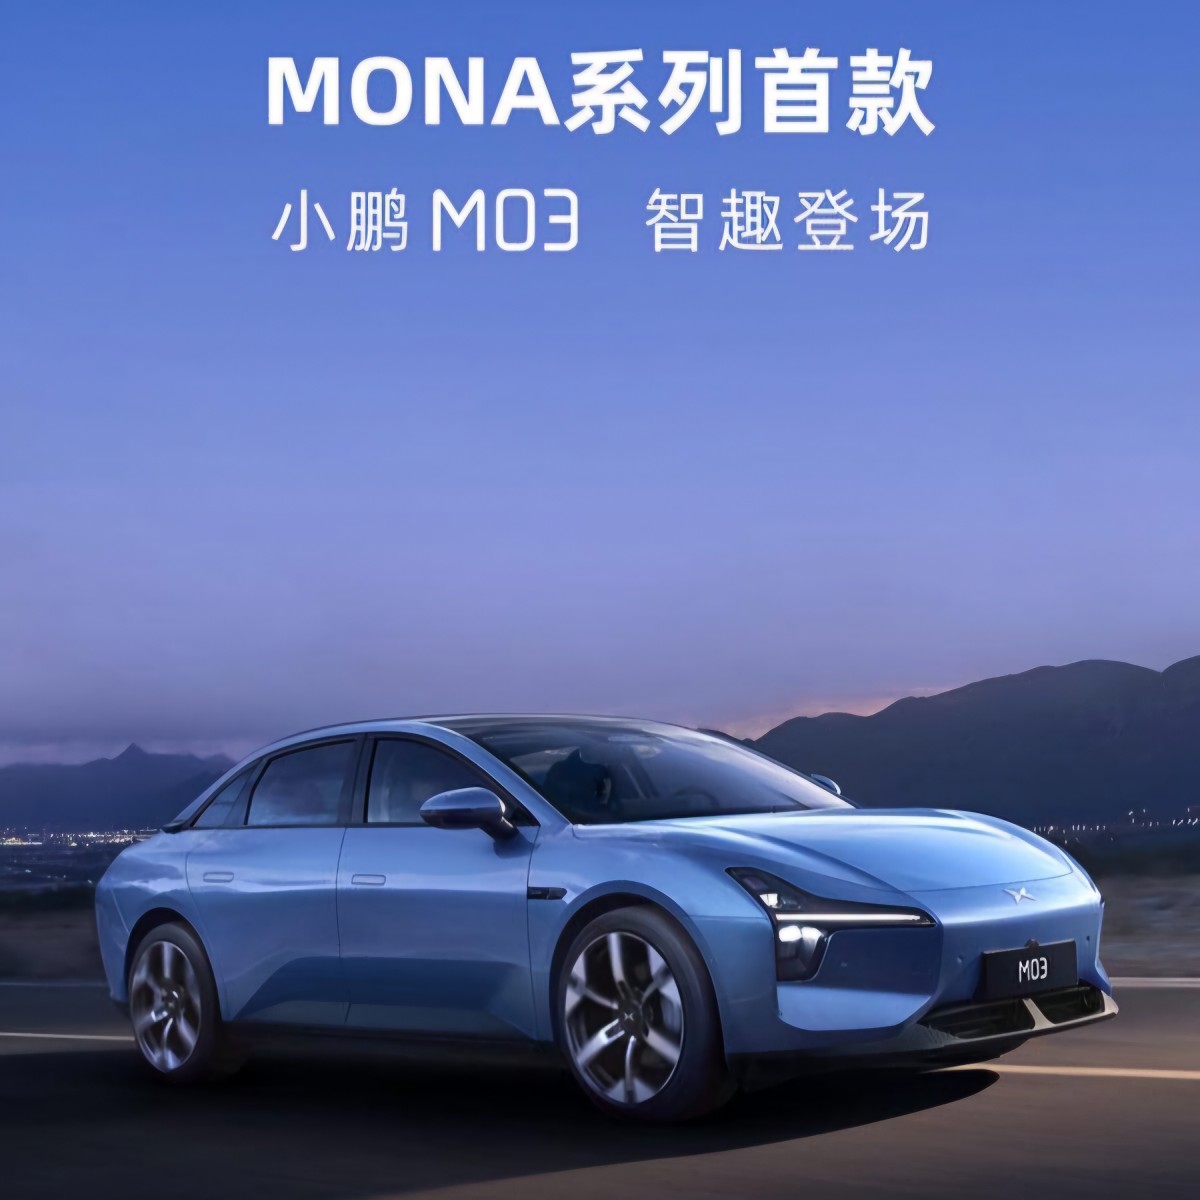 XPeng reveals official image of Mona M03